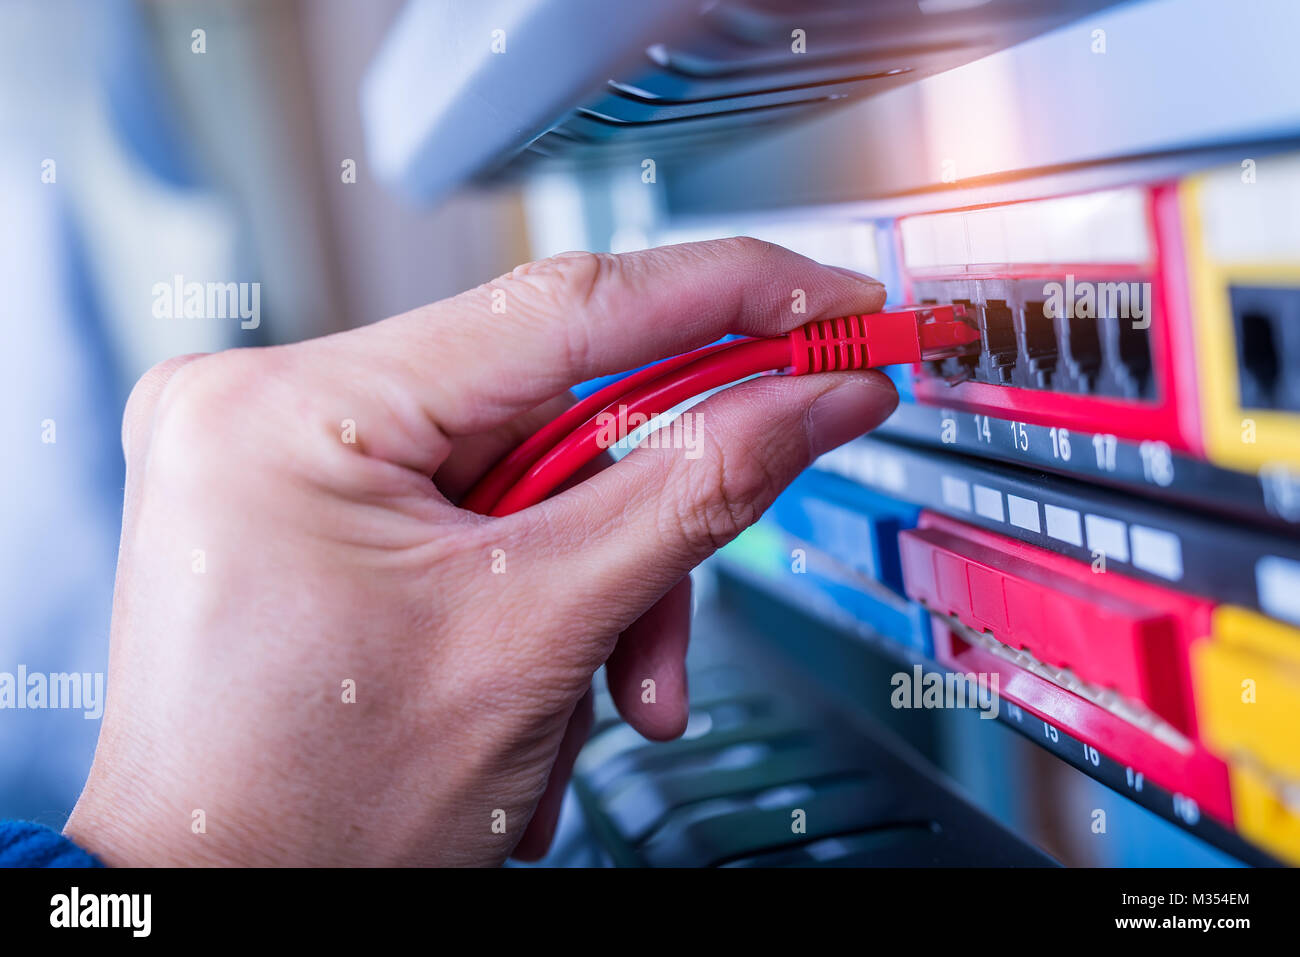 administrator holding network cables connected to servers Stock Photo